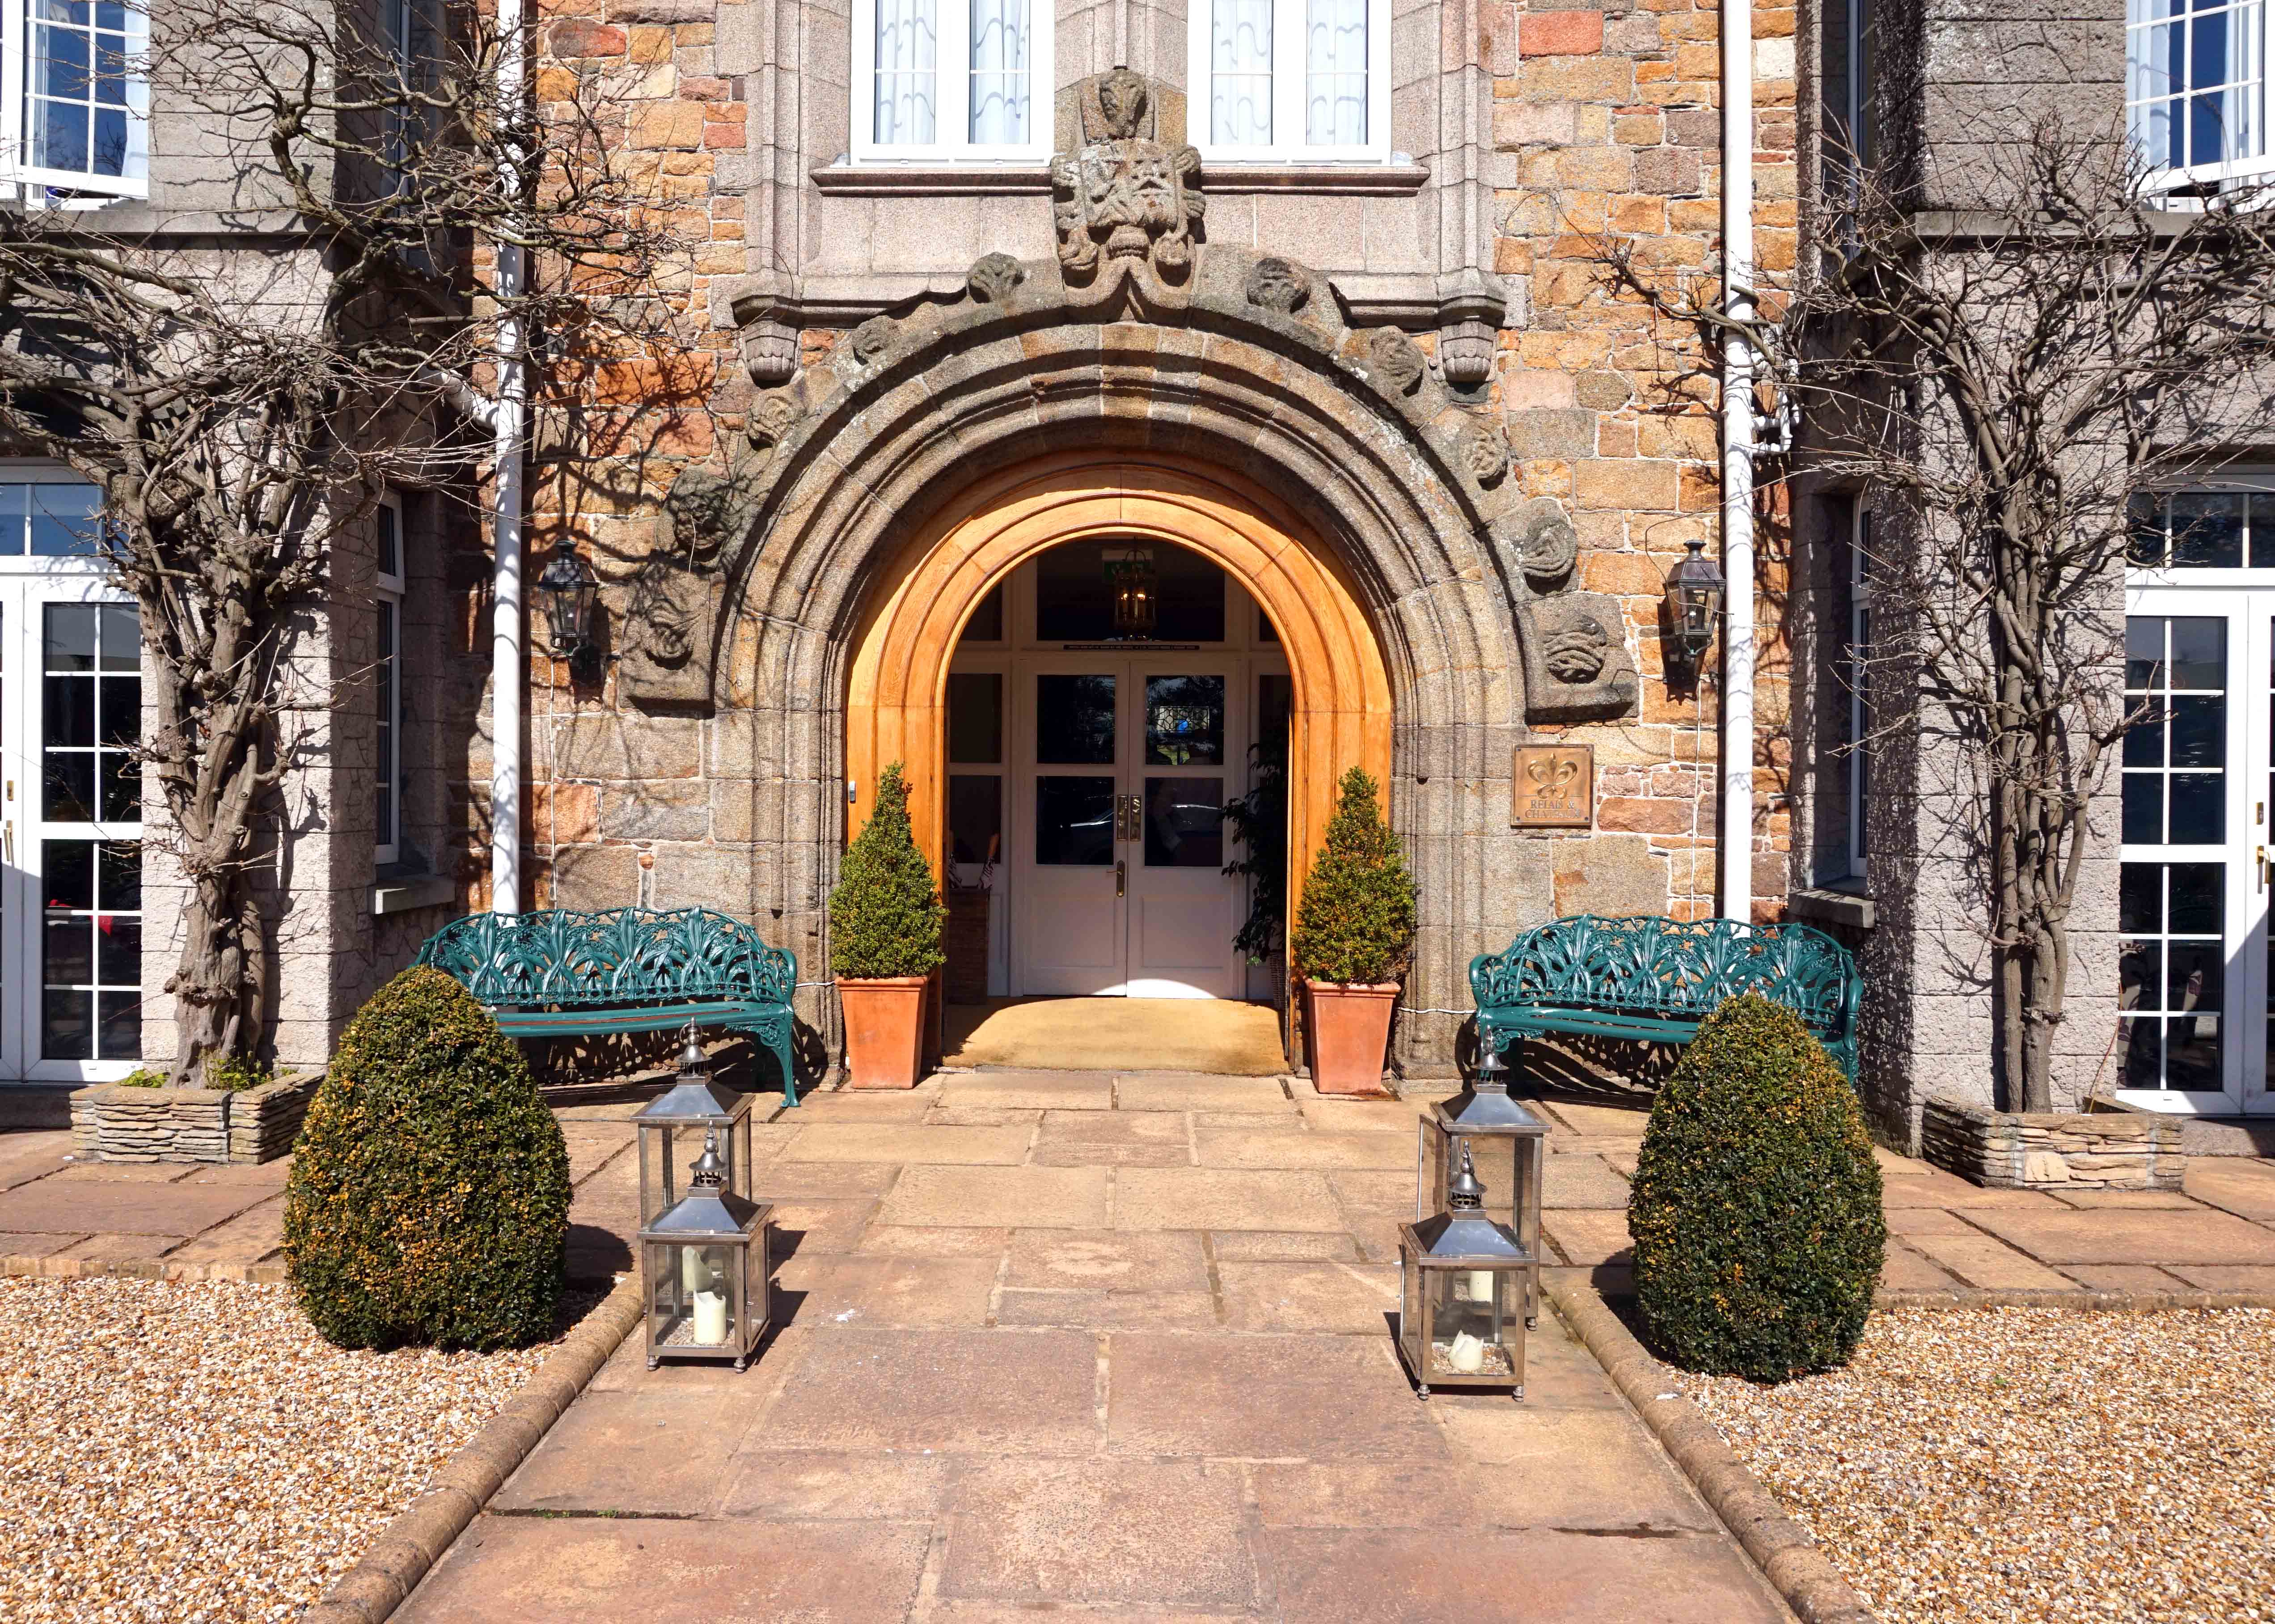 TheHotelaholic - REVIEW: Longueville Manor, Longueville Road, St.Saviour, Jersey